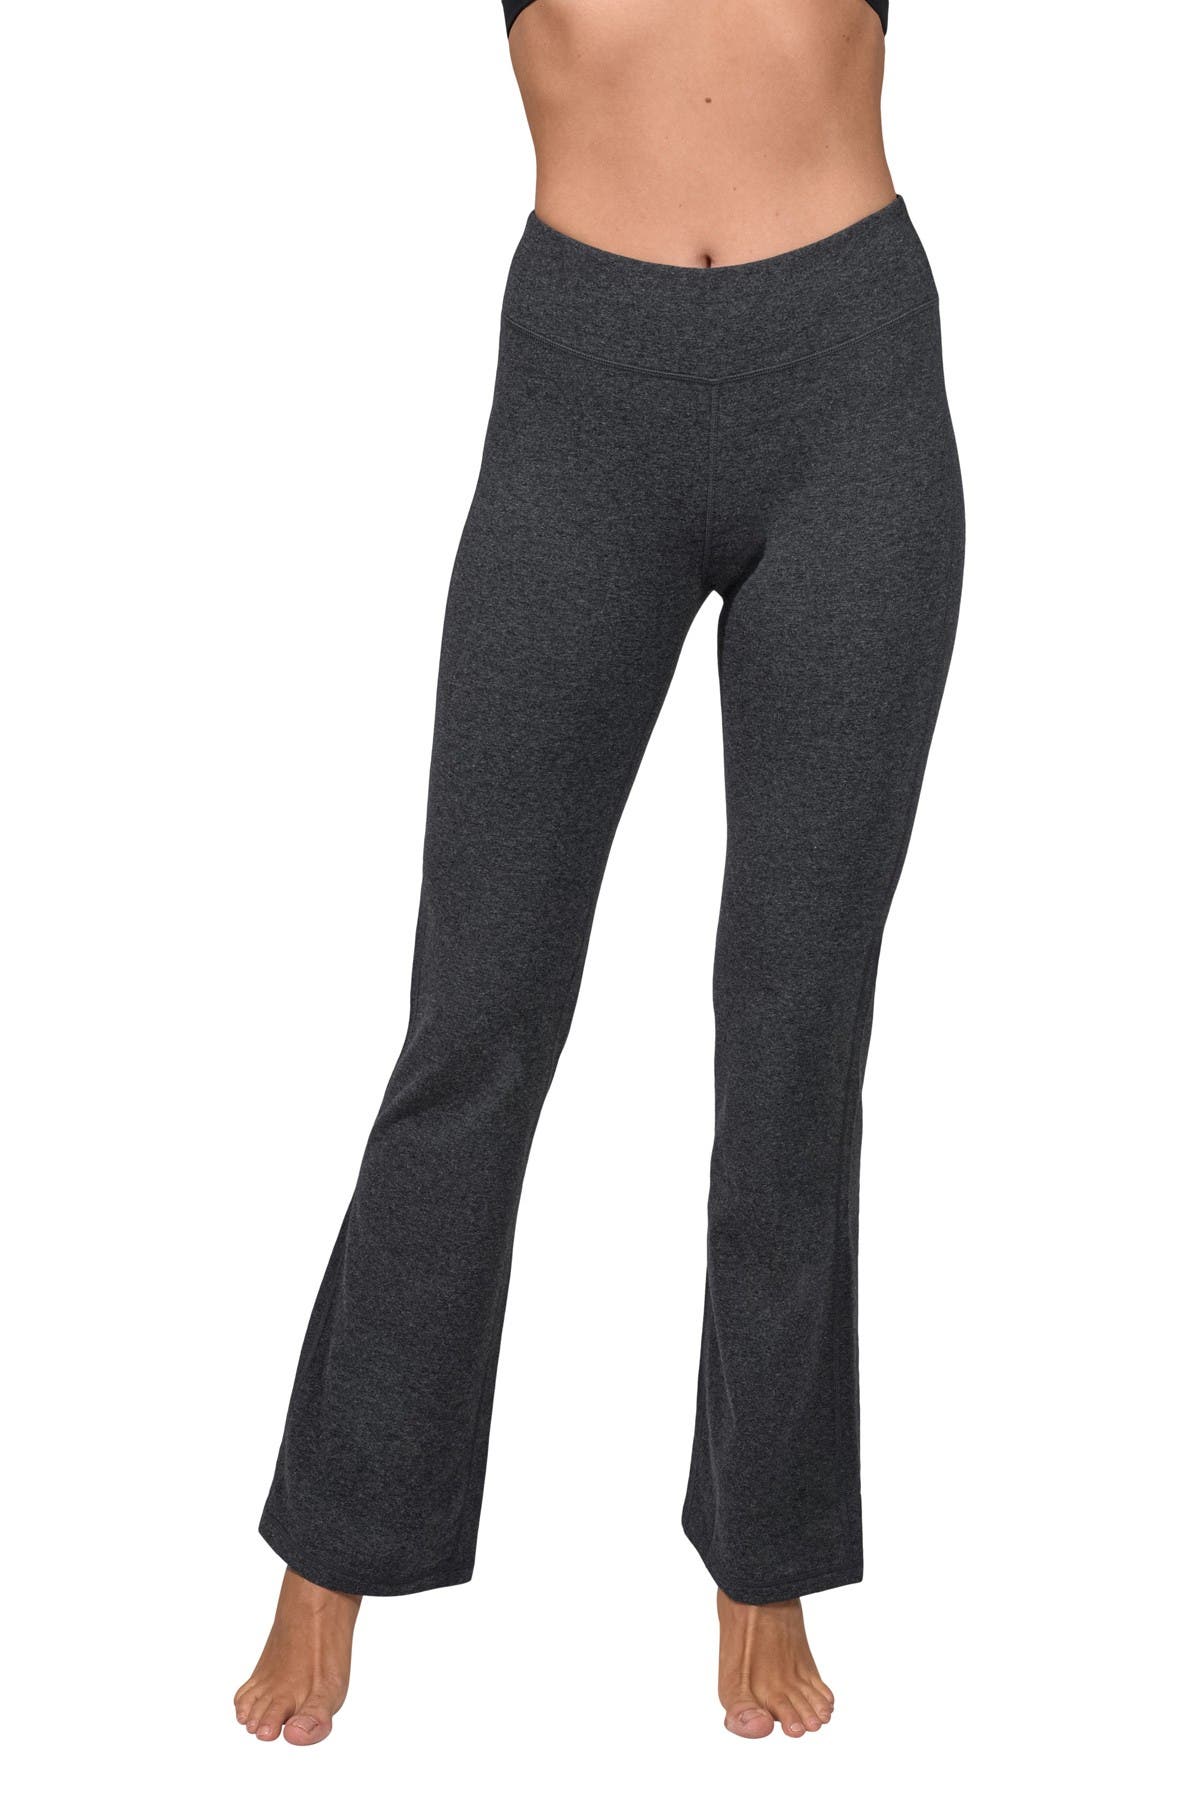 90 Degree By Reflex Cotton Stretch Bootcut Leggings In Htr.charcoal ...